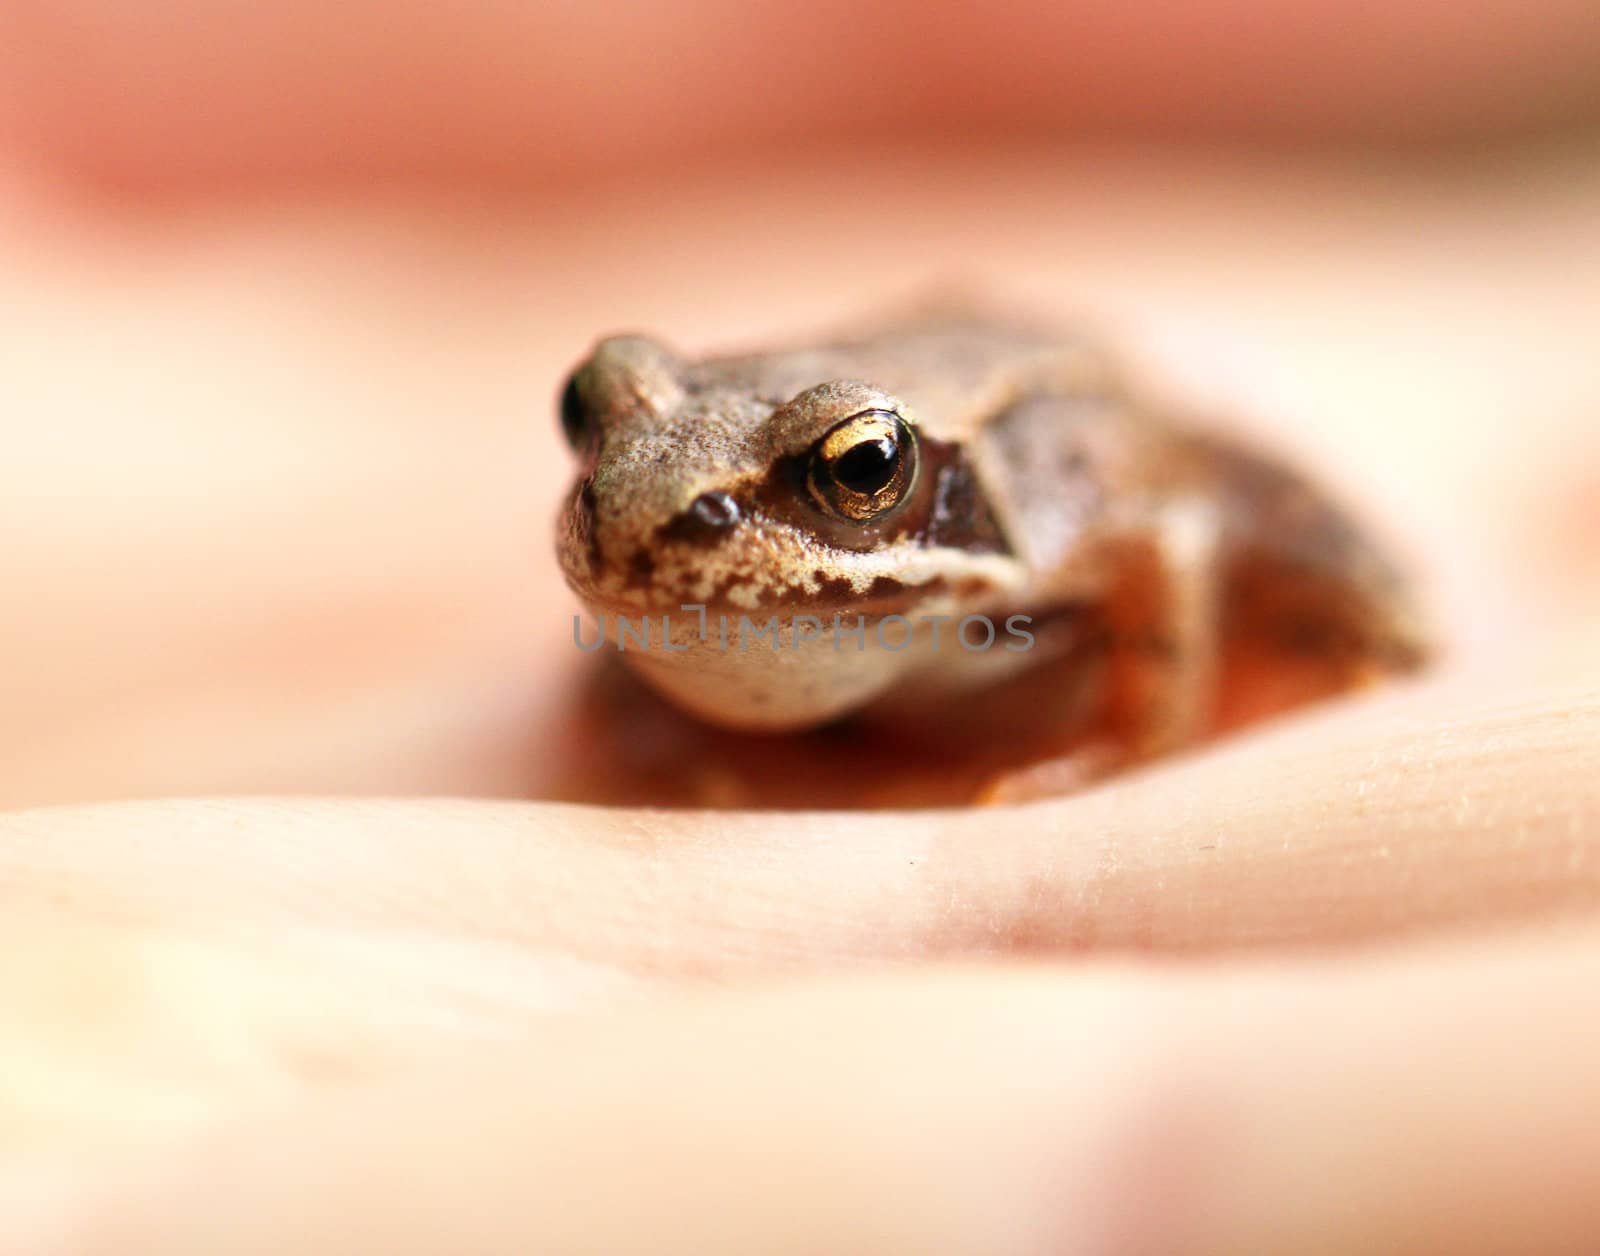 A small brown frog on hand